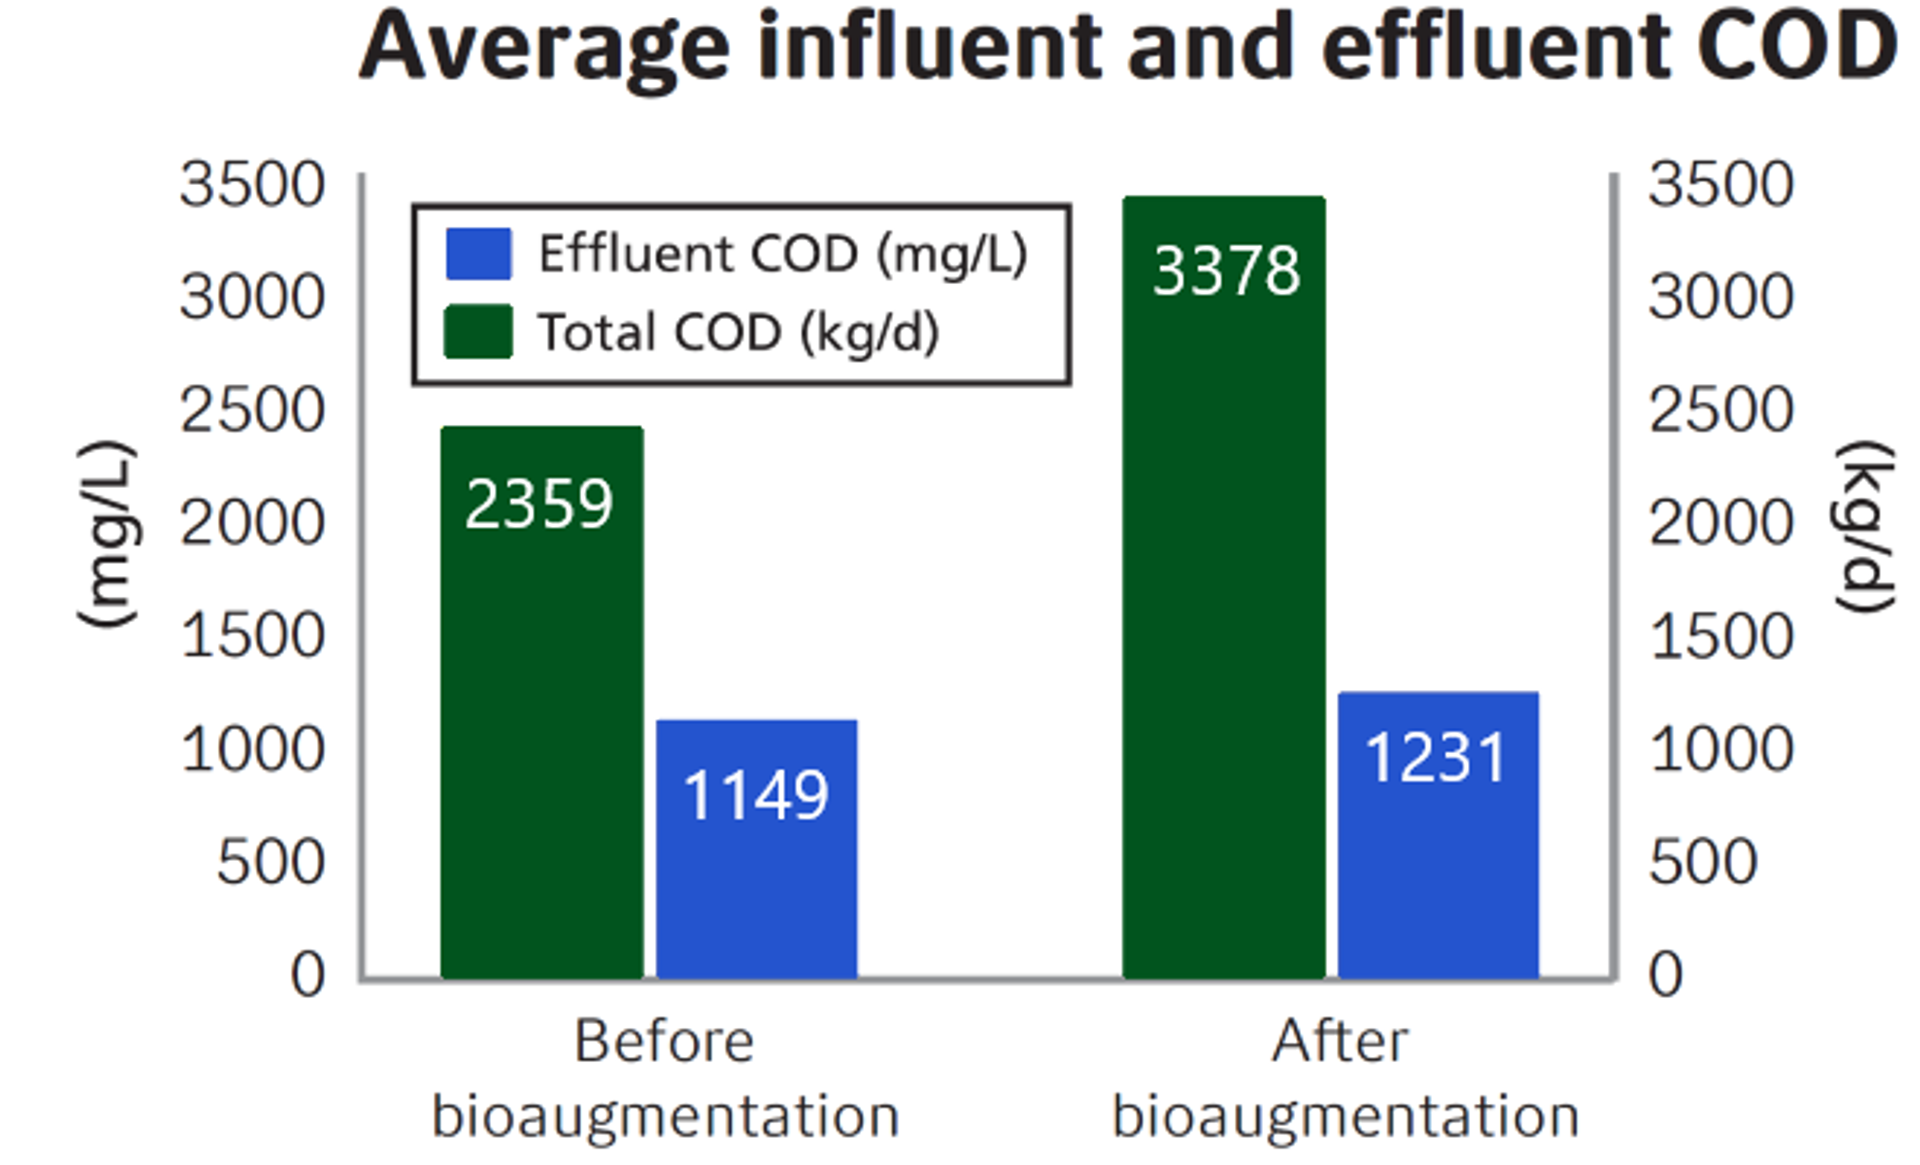 Average influent and effluent COD, before and after bioaugmentation began